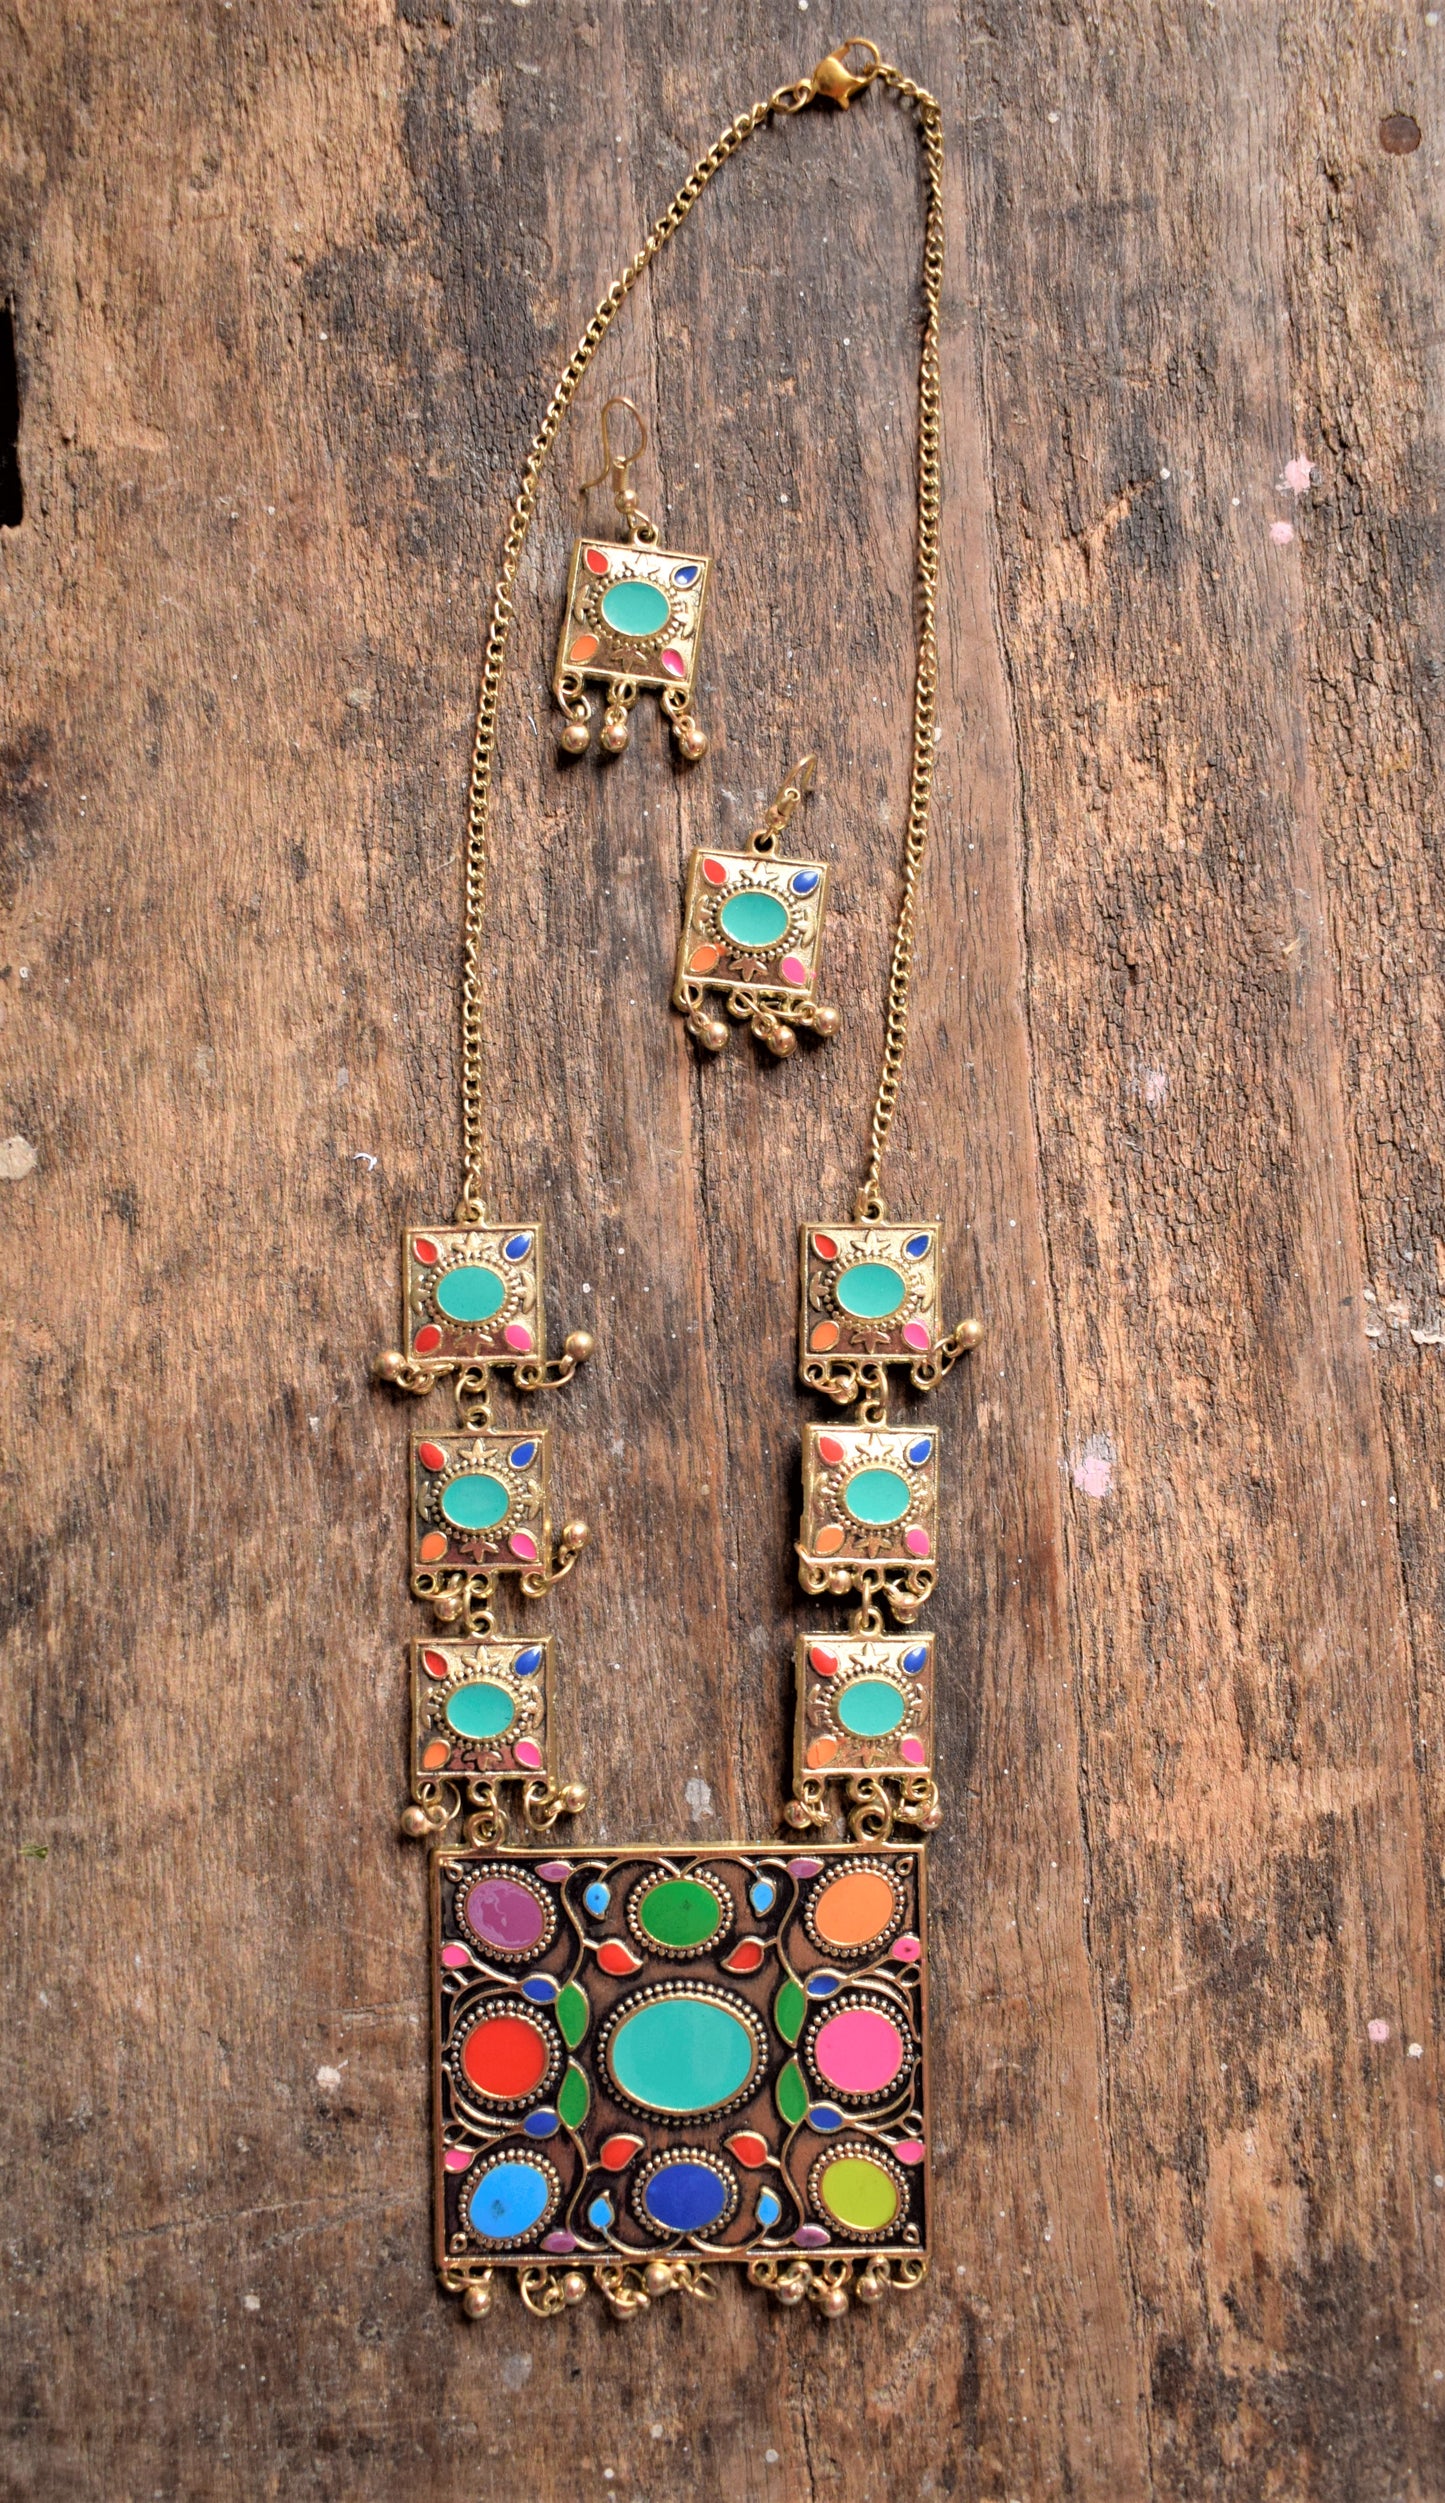 Afghani Square Oxidised Necklace with Earrings - GlitterGleam